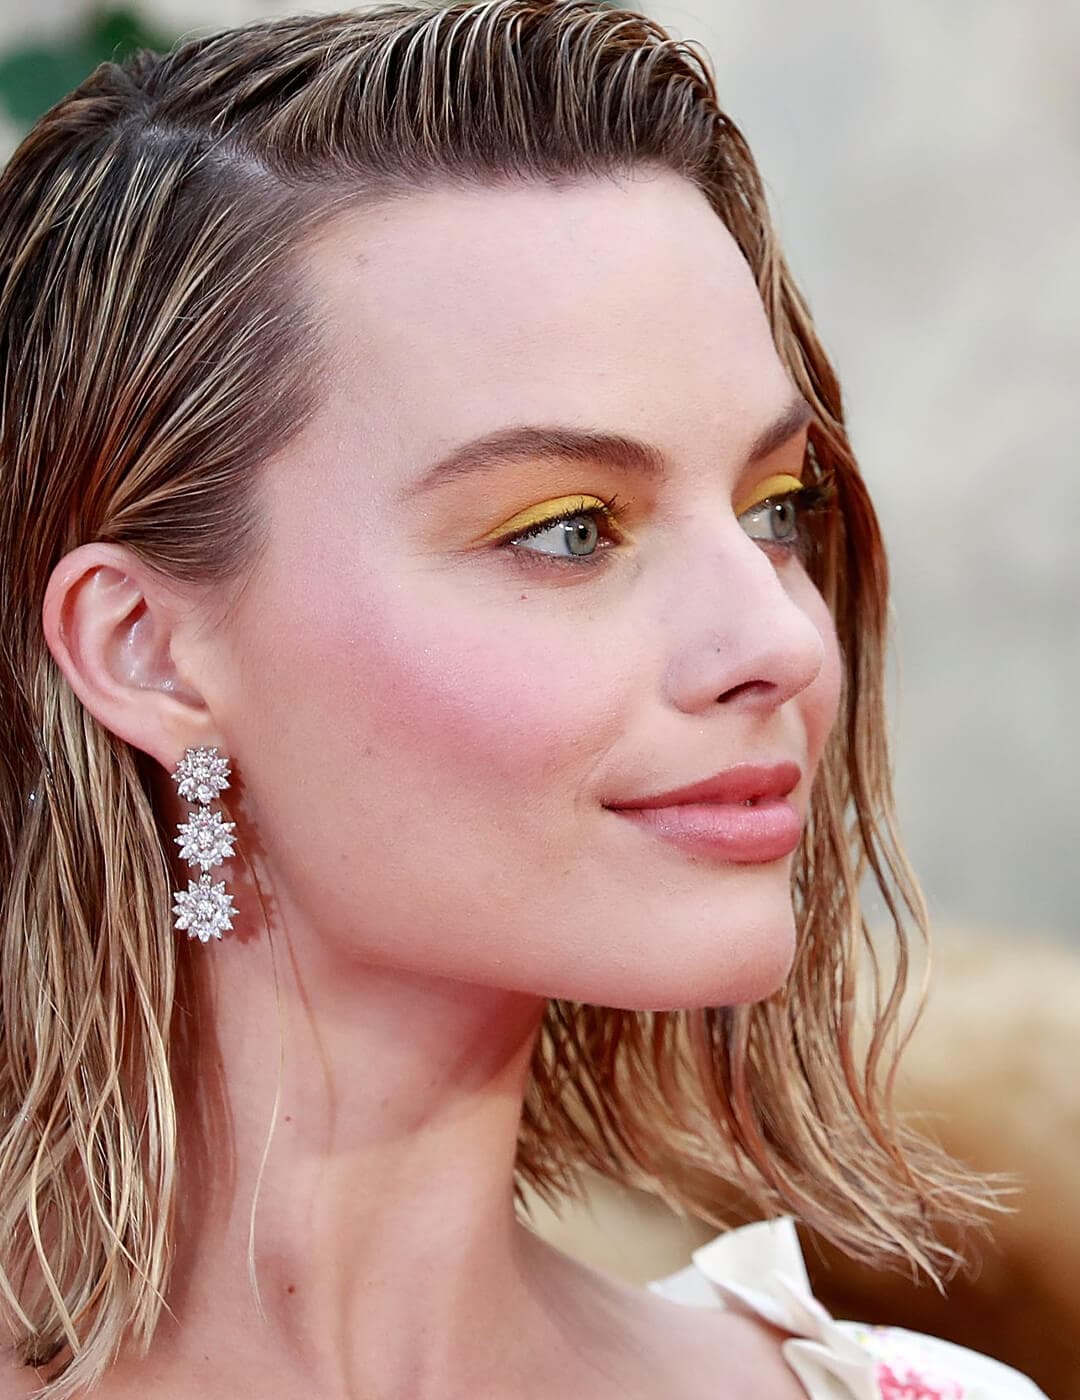 Margot Robbie rocking a wet look hairstyle and buttery yellow eye makeup look